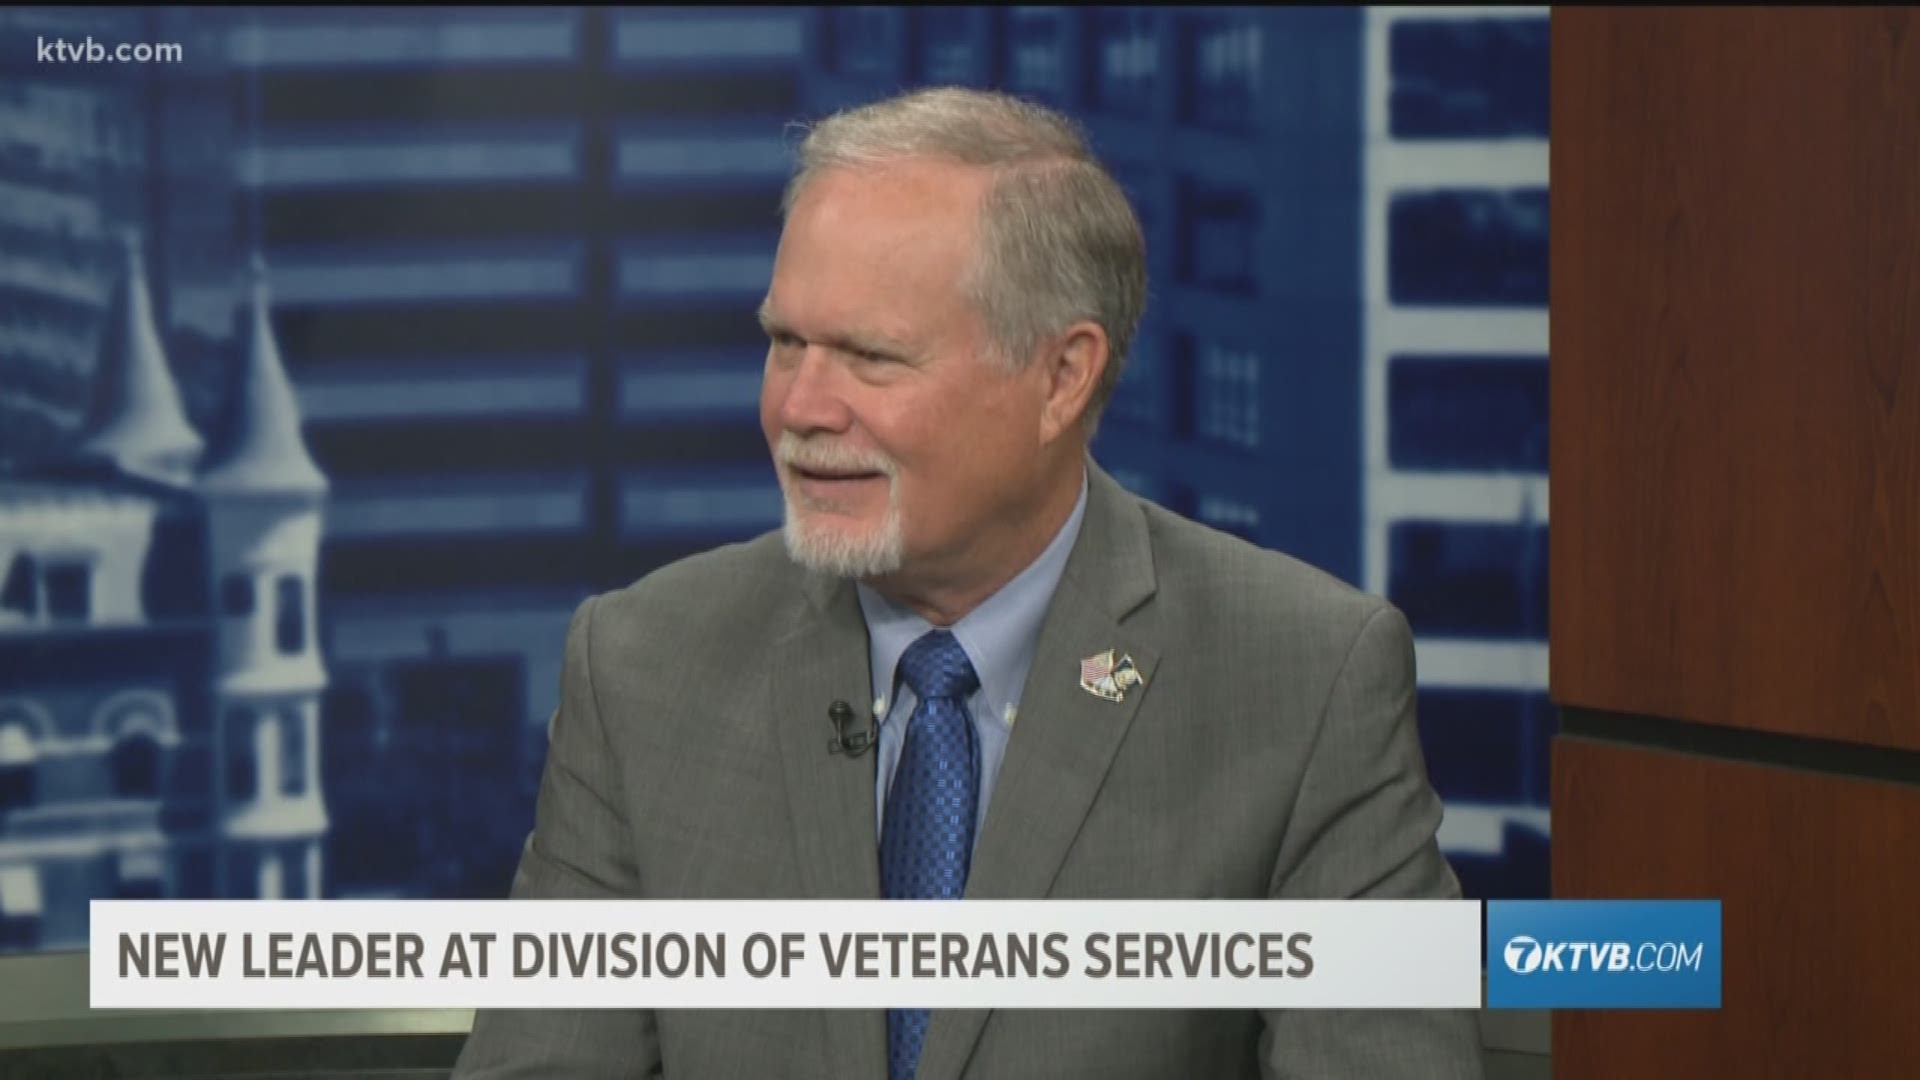 Viewpoint: New Division of Veterans Services leader; Trump administration foreign policy